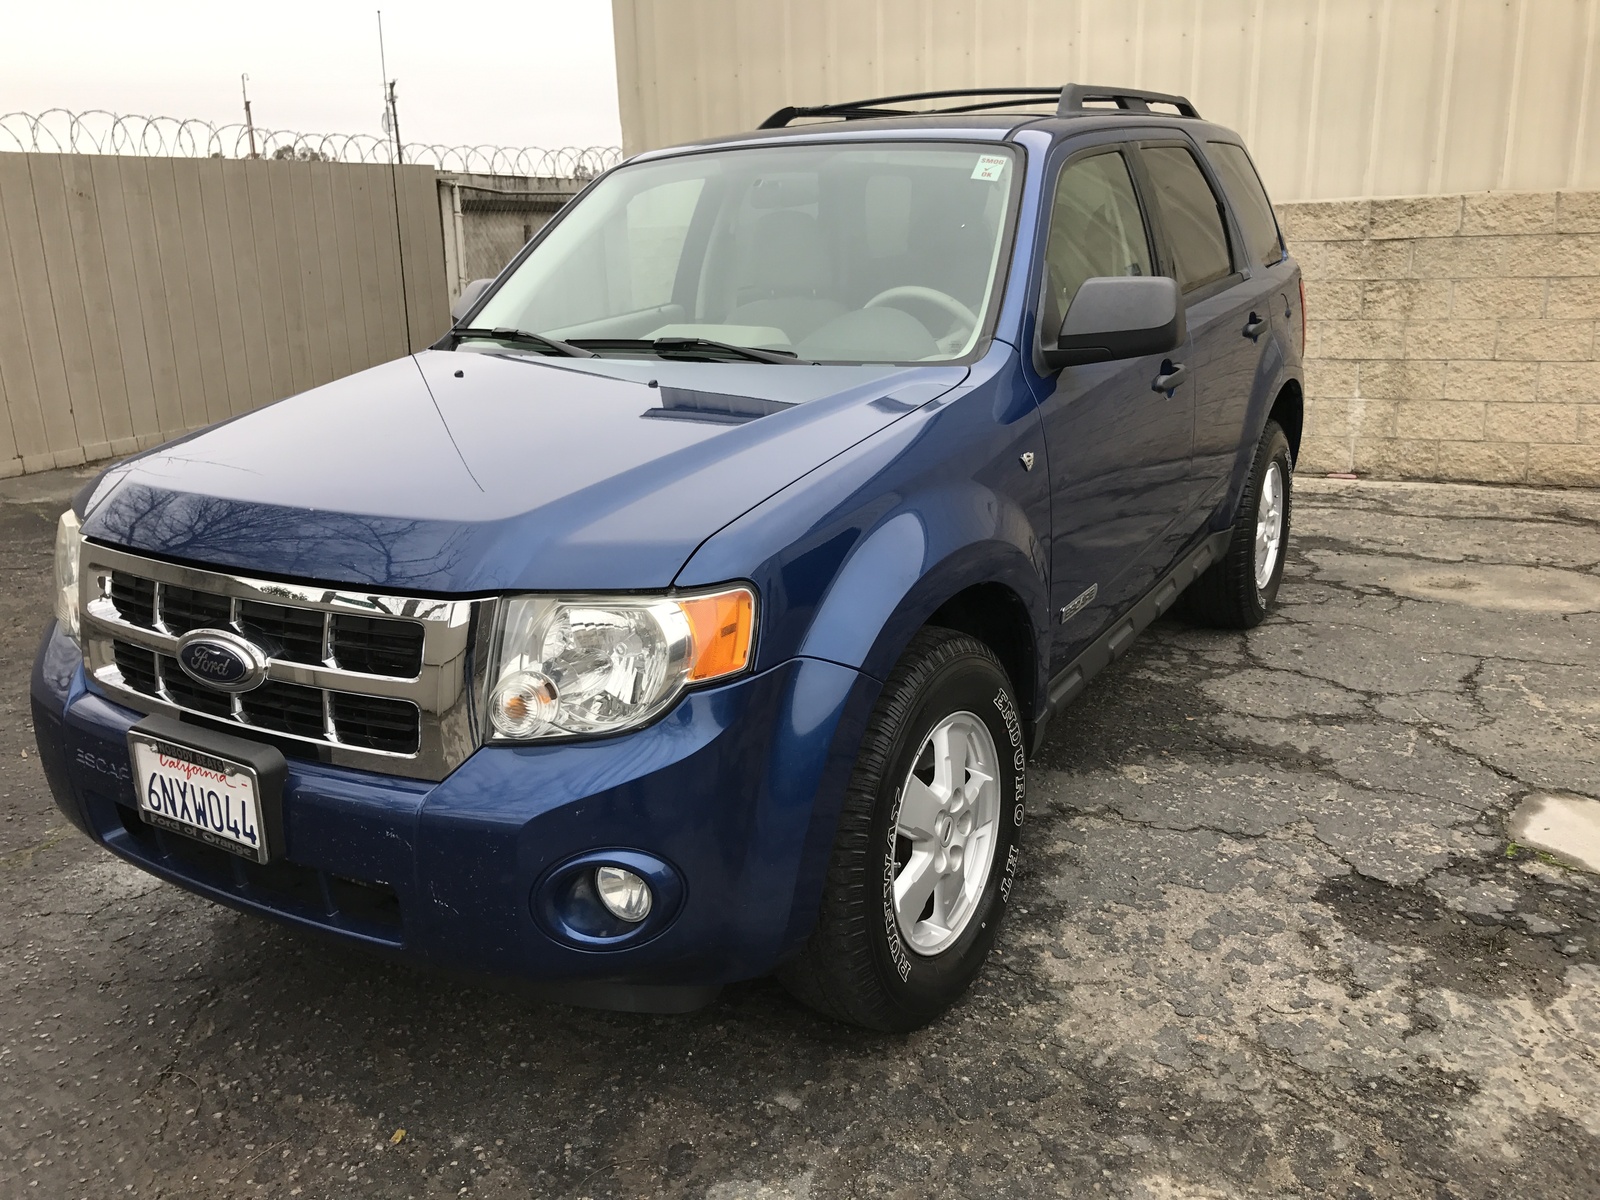 2008 Ford Escape: Prices, Reviews & Pictures - CarGurus